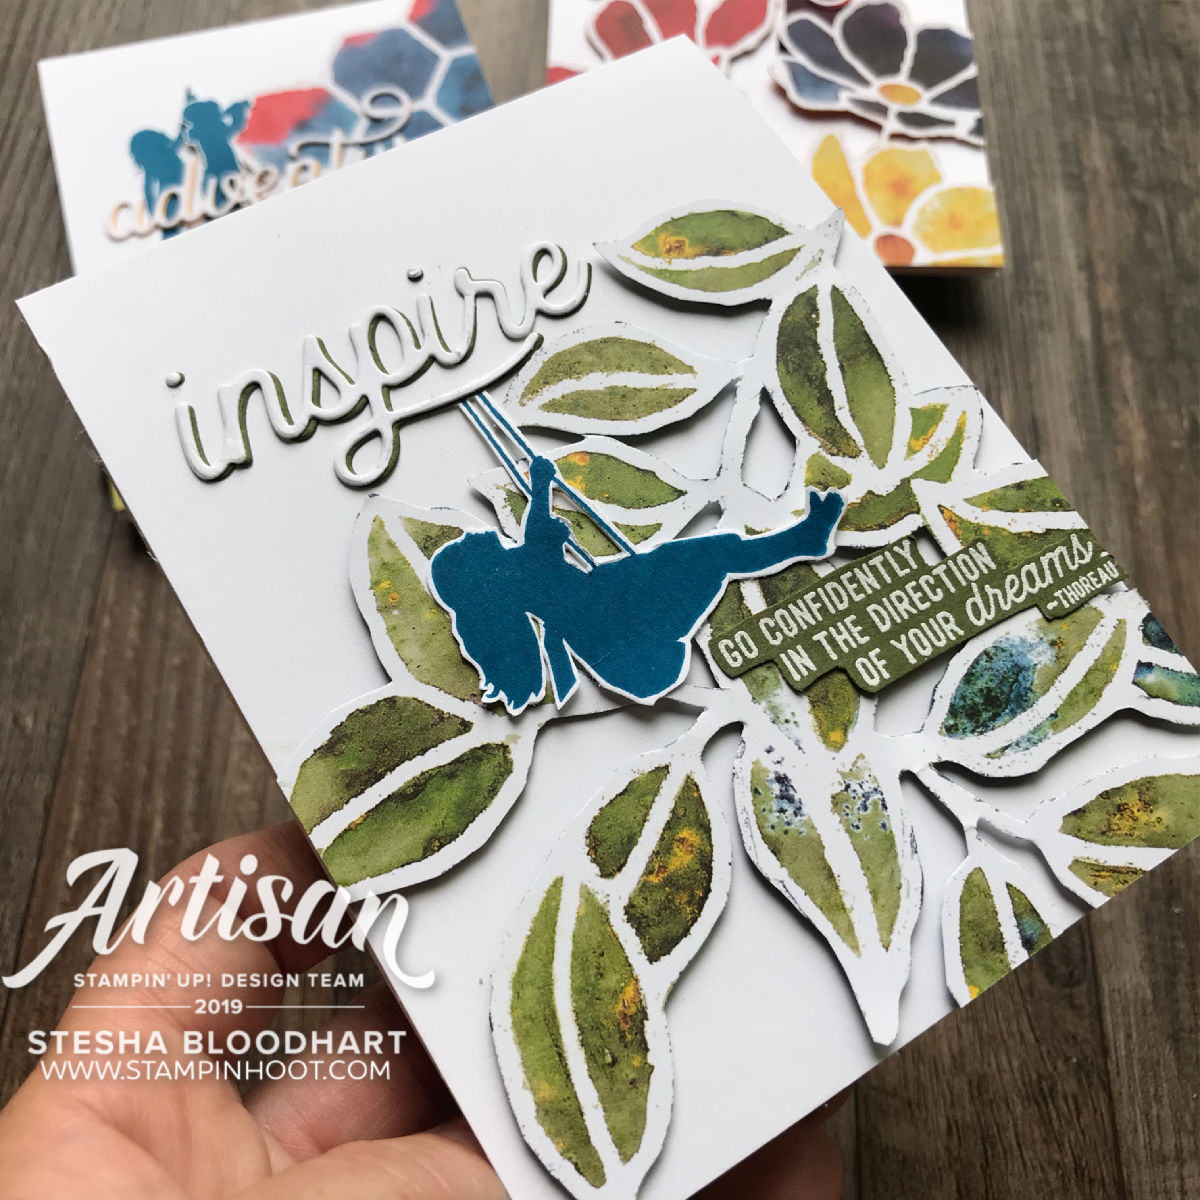 See a Silhouette Designer Series Paper by Stampin' Up! Card by Stesha Bloodhart, Stampin' Hoot! 2019 Artisan Design Team Member